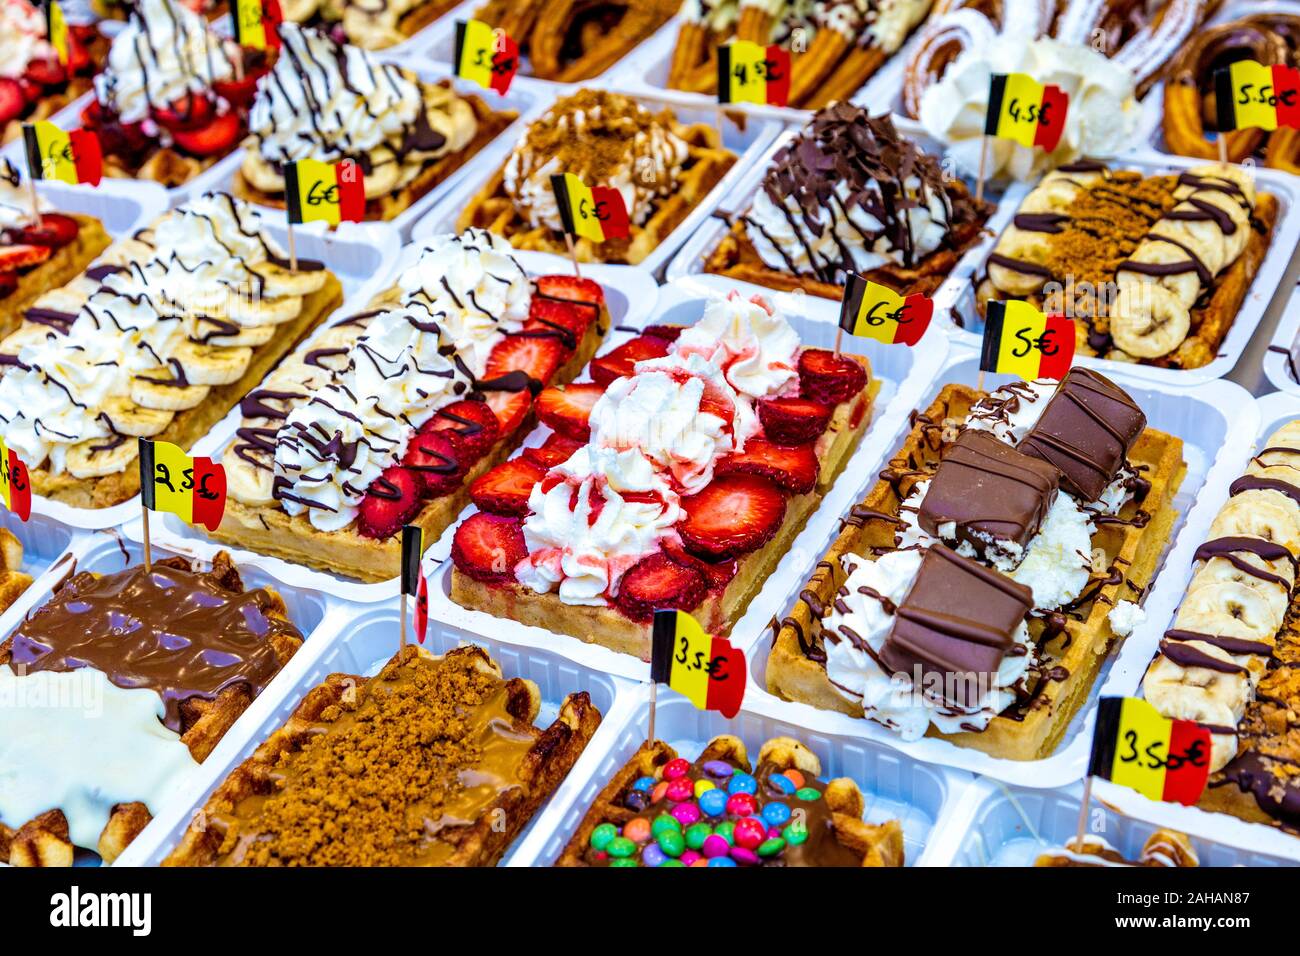 Belgian waffles with a variety of toppings in Brussels, Belgium Stock Photo